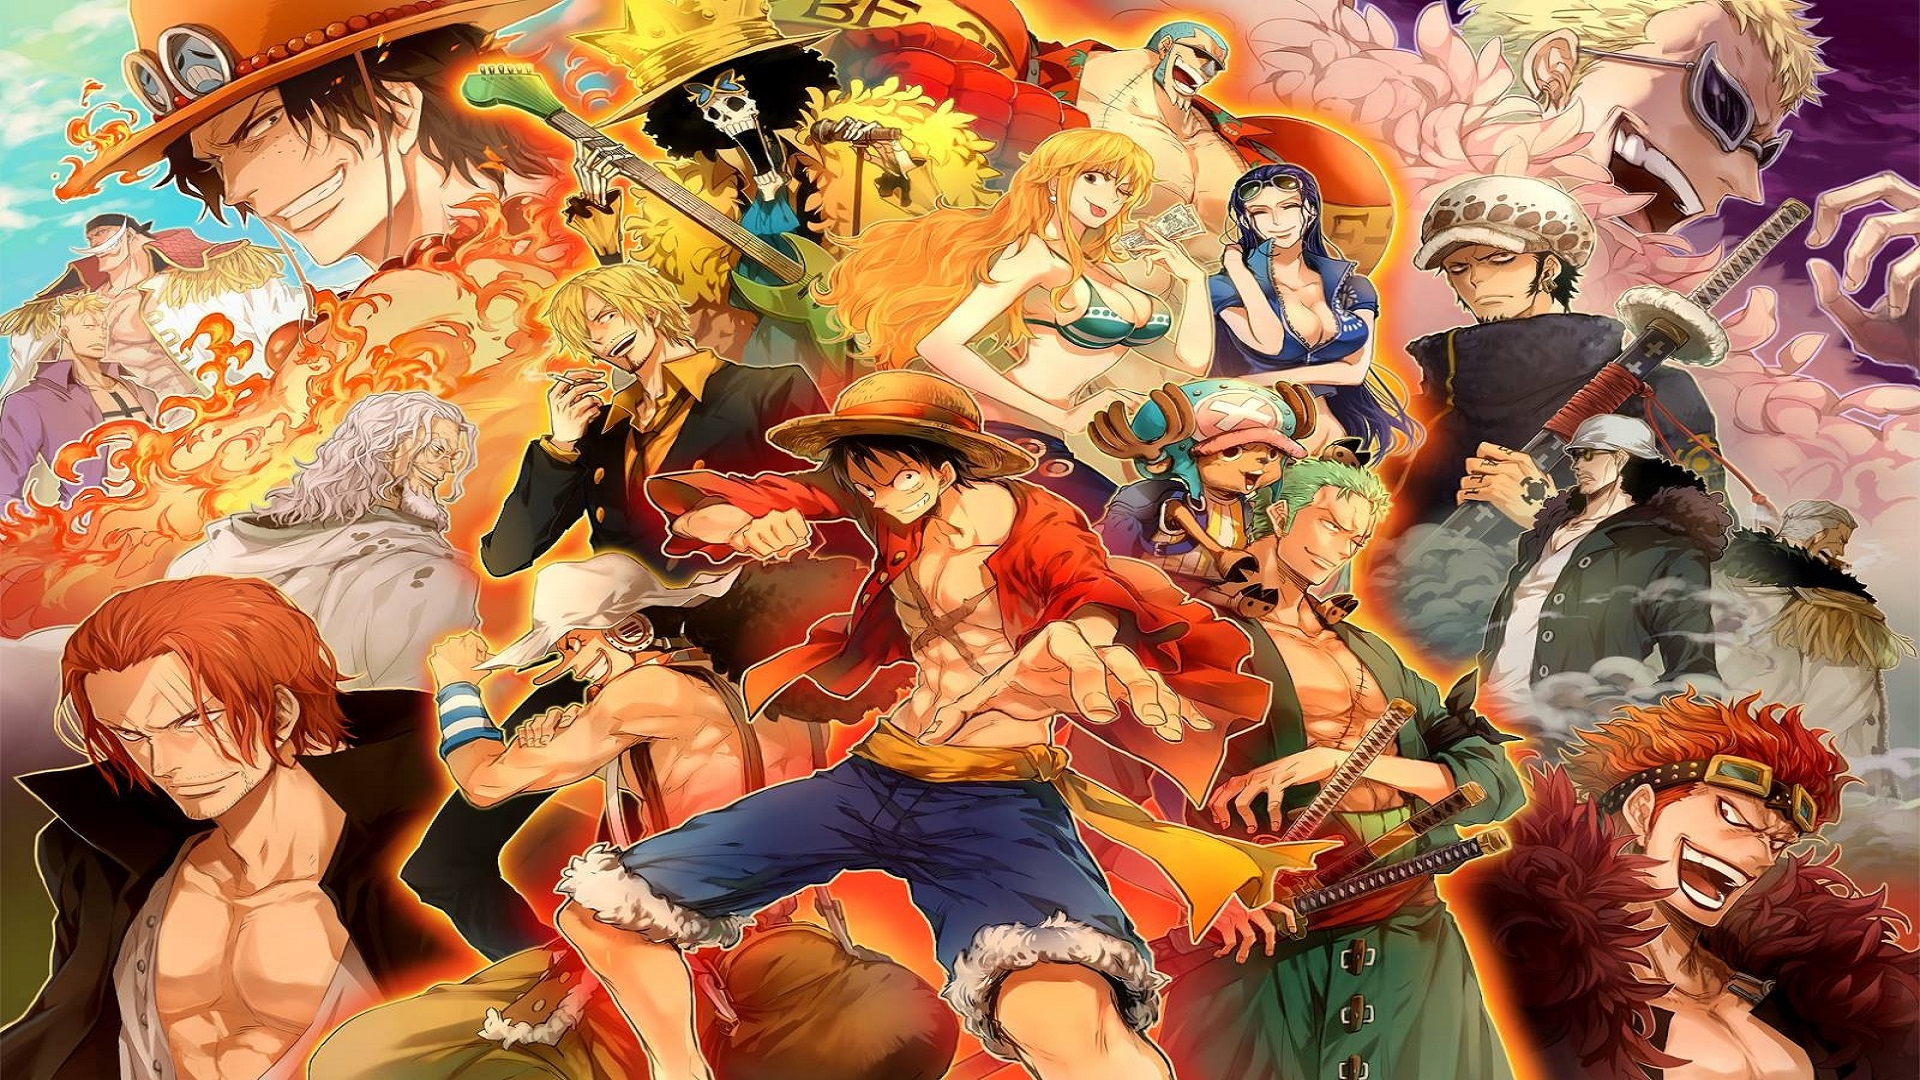 Game one piece pirate warriors 1 pc